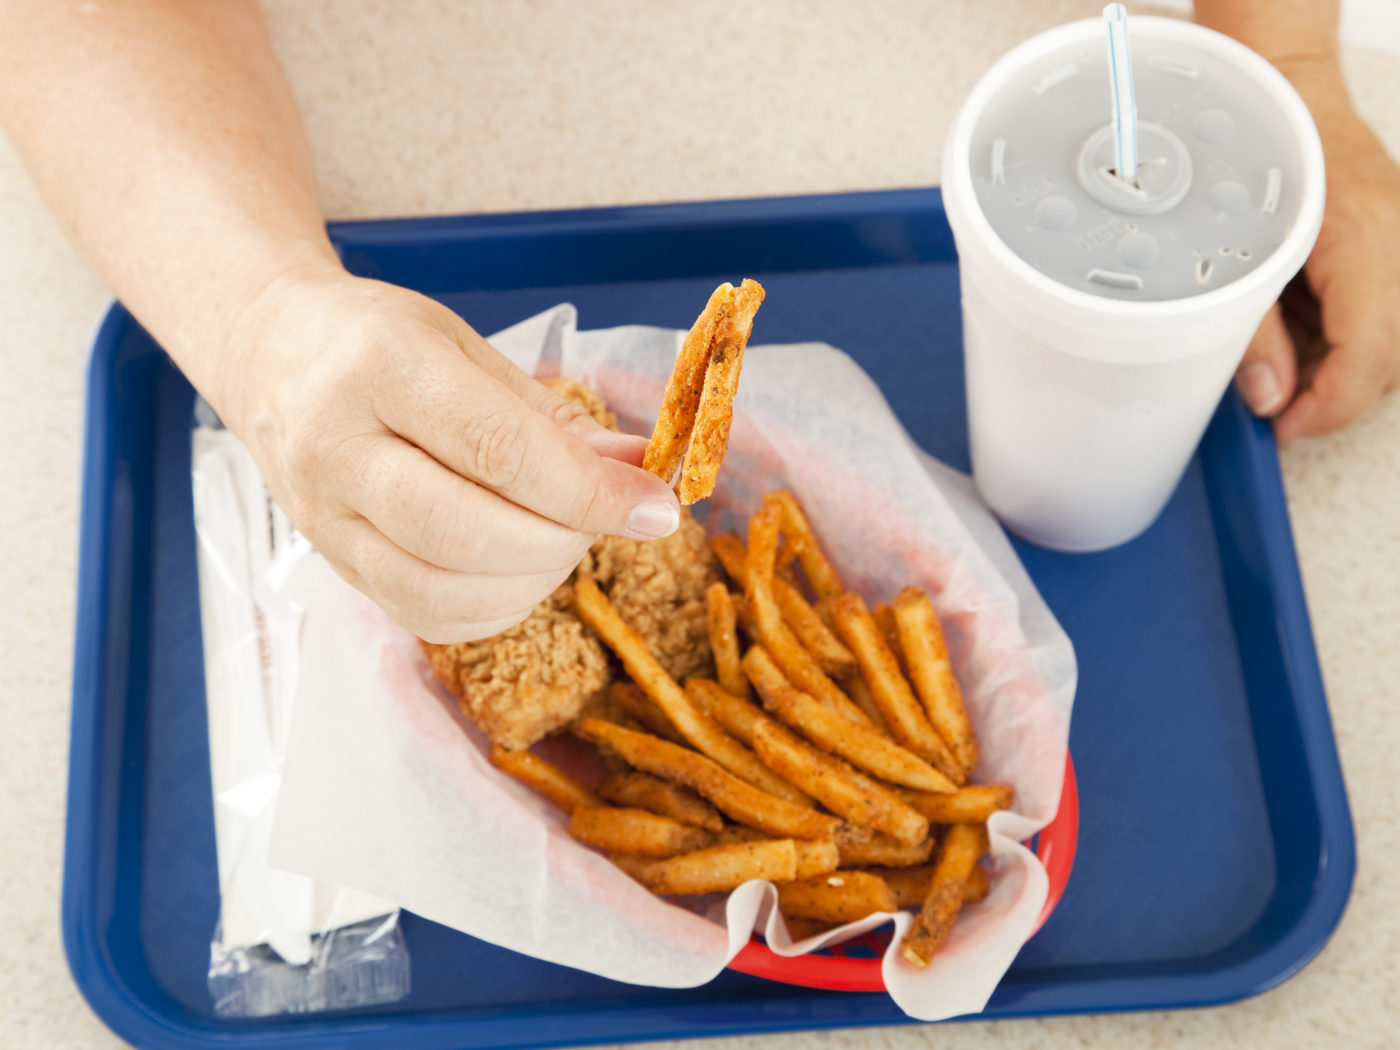 A plate of greasy fast food, with the customer holding up a greasy french fried potato to the camera.  Focus on the hand and the fry.